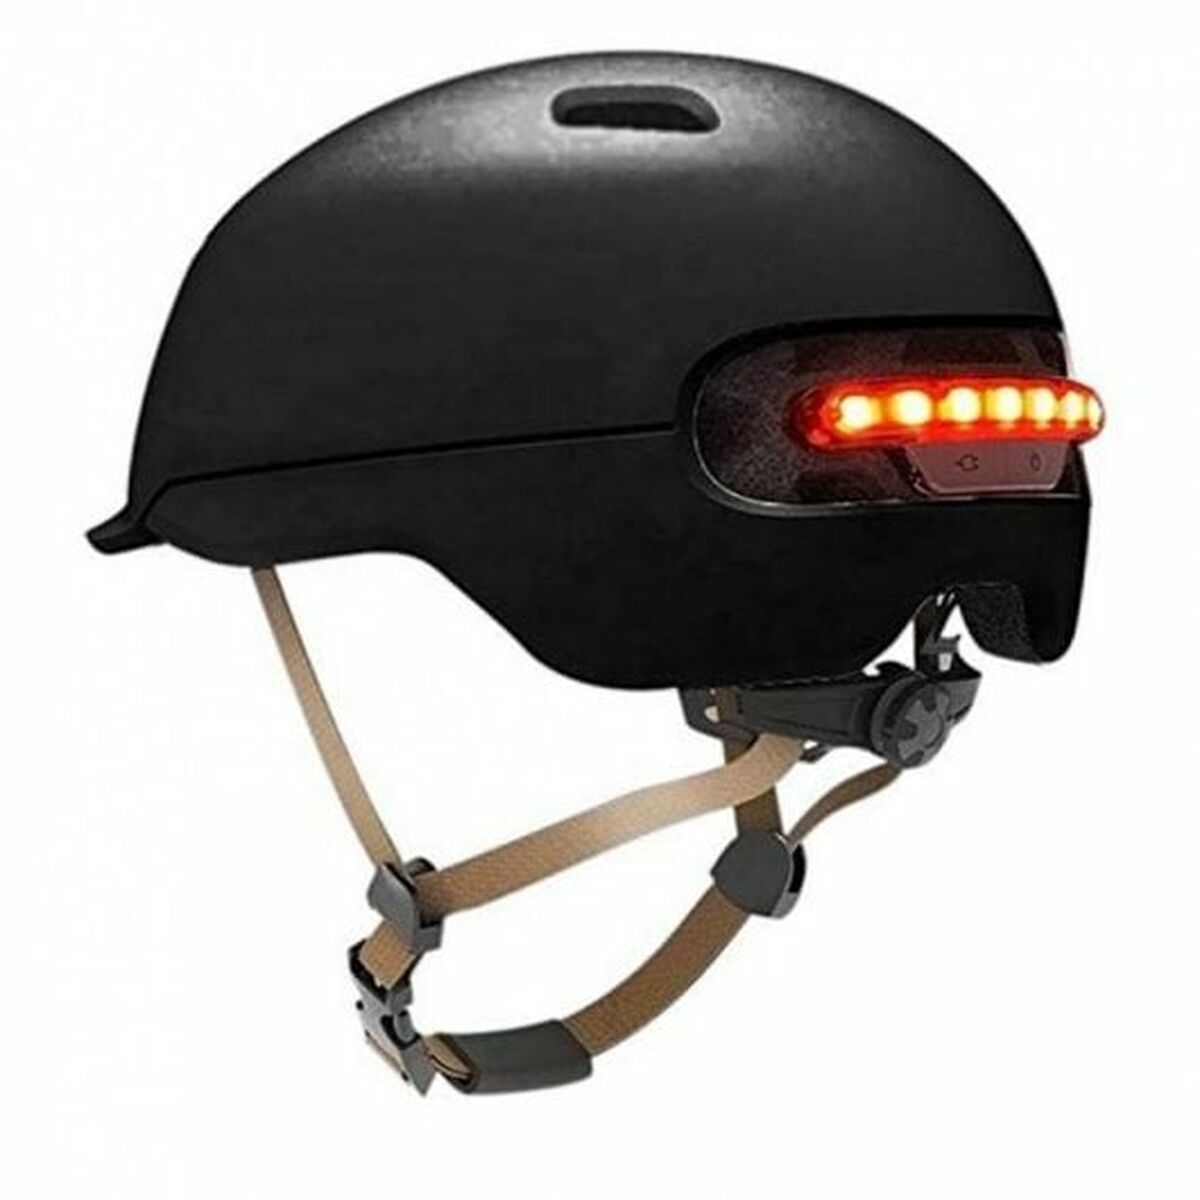 Cover for Electric Scooter Black LED Light, BigBuy Tech, Sports and outdoors, Urban mobility, cover-for-electric-scooter-black-led-light, bicicleta, Brand_BigBuy Tech, category-reference-2609, category-reference-2629, category-reference-2904, category-reference-t-19681, category-reference-t-19756, category-reference-t-19876, category-reference-t-21245, Condition_NEW, deportista / en forma, Price_50 - 100, vida sana, RiotNook